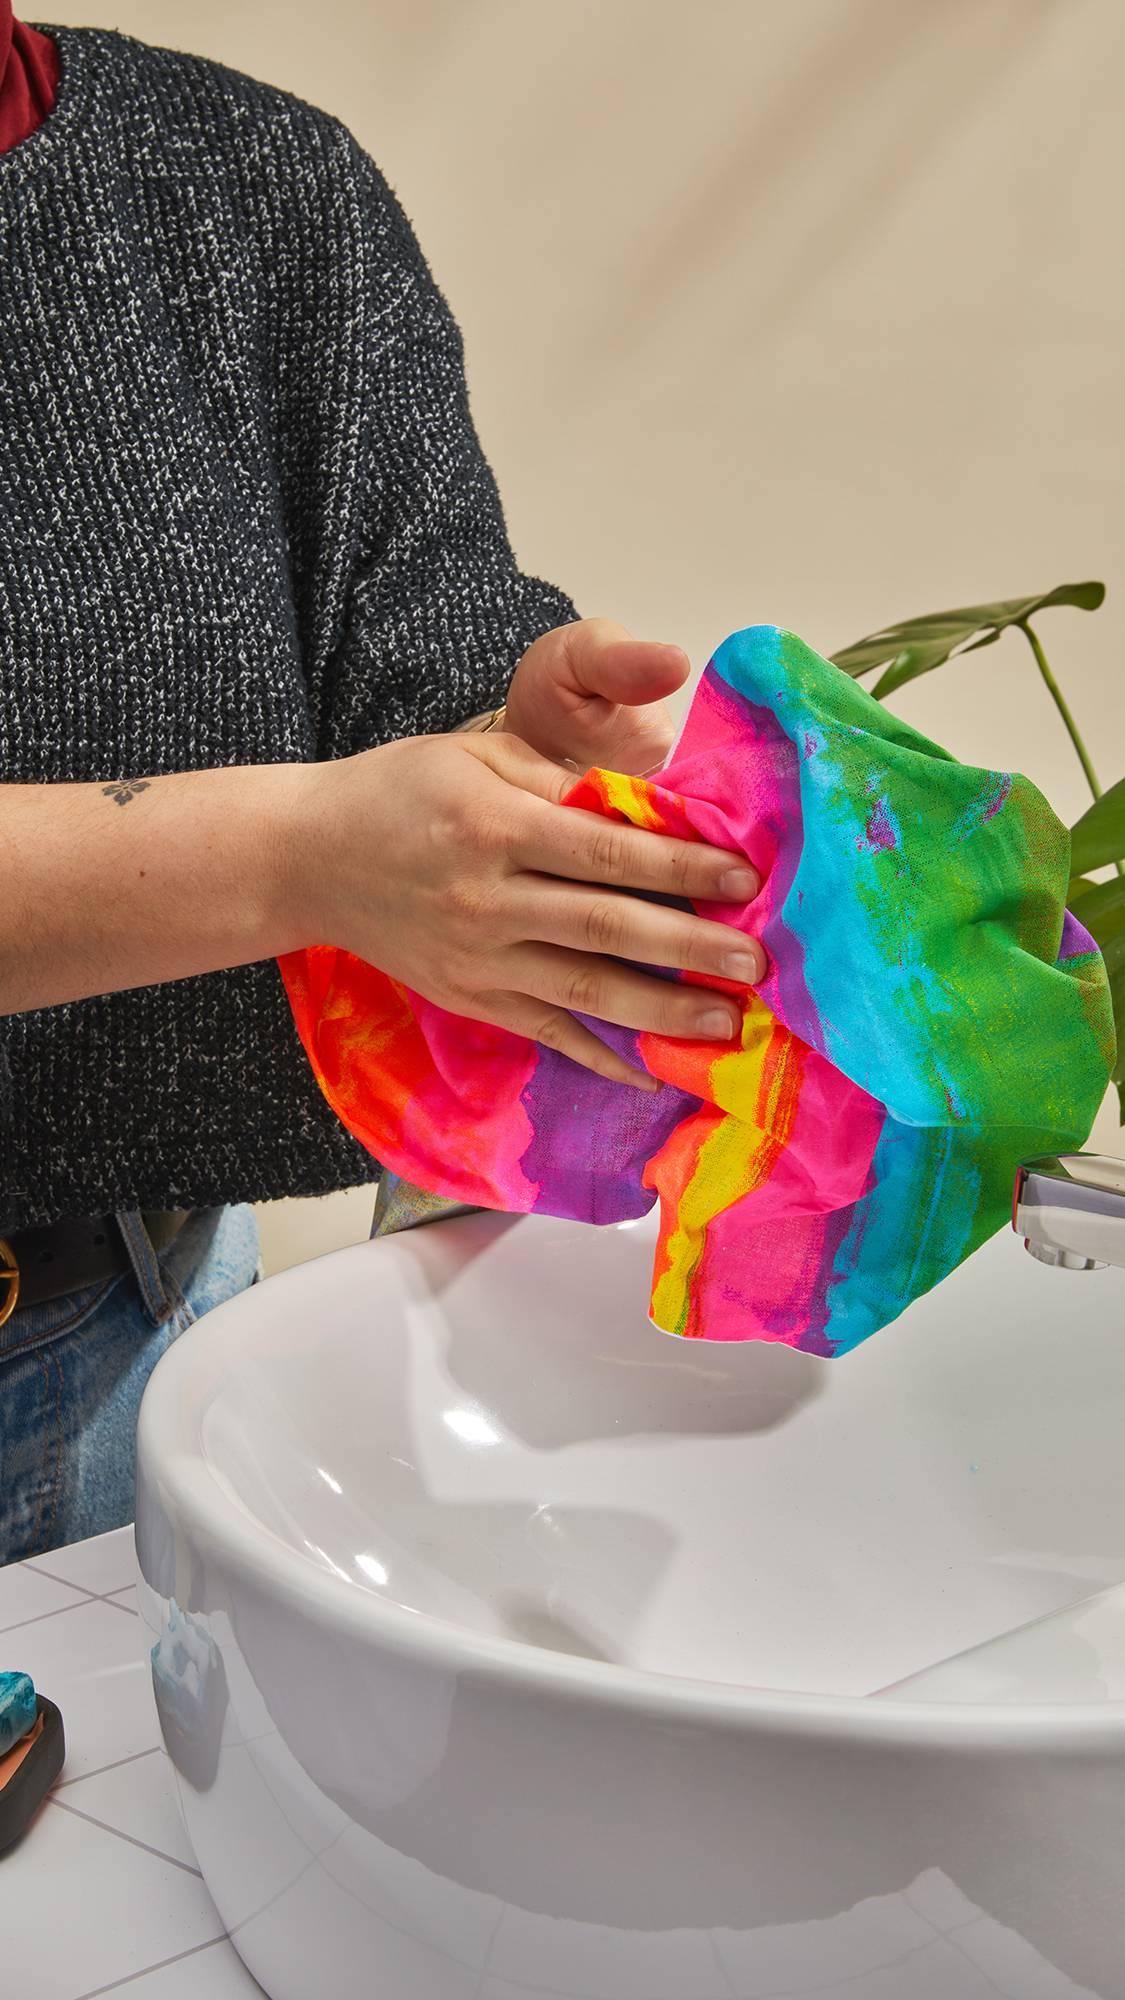 The image shows the model stood at the sink drying their hands with the All The Colours Tenugui knot wrap after having just washed their hands. 